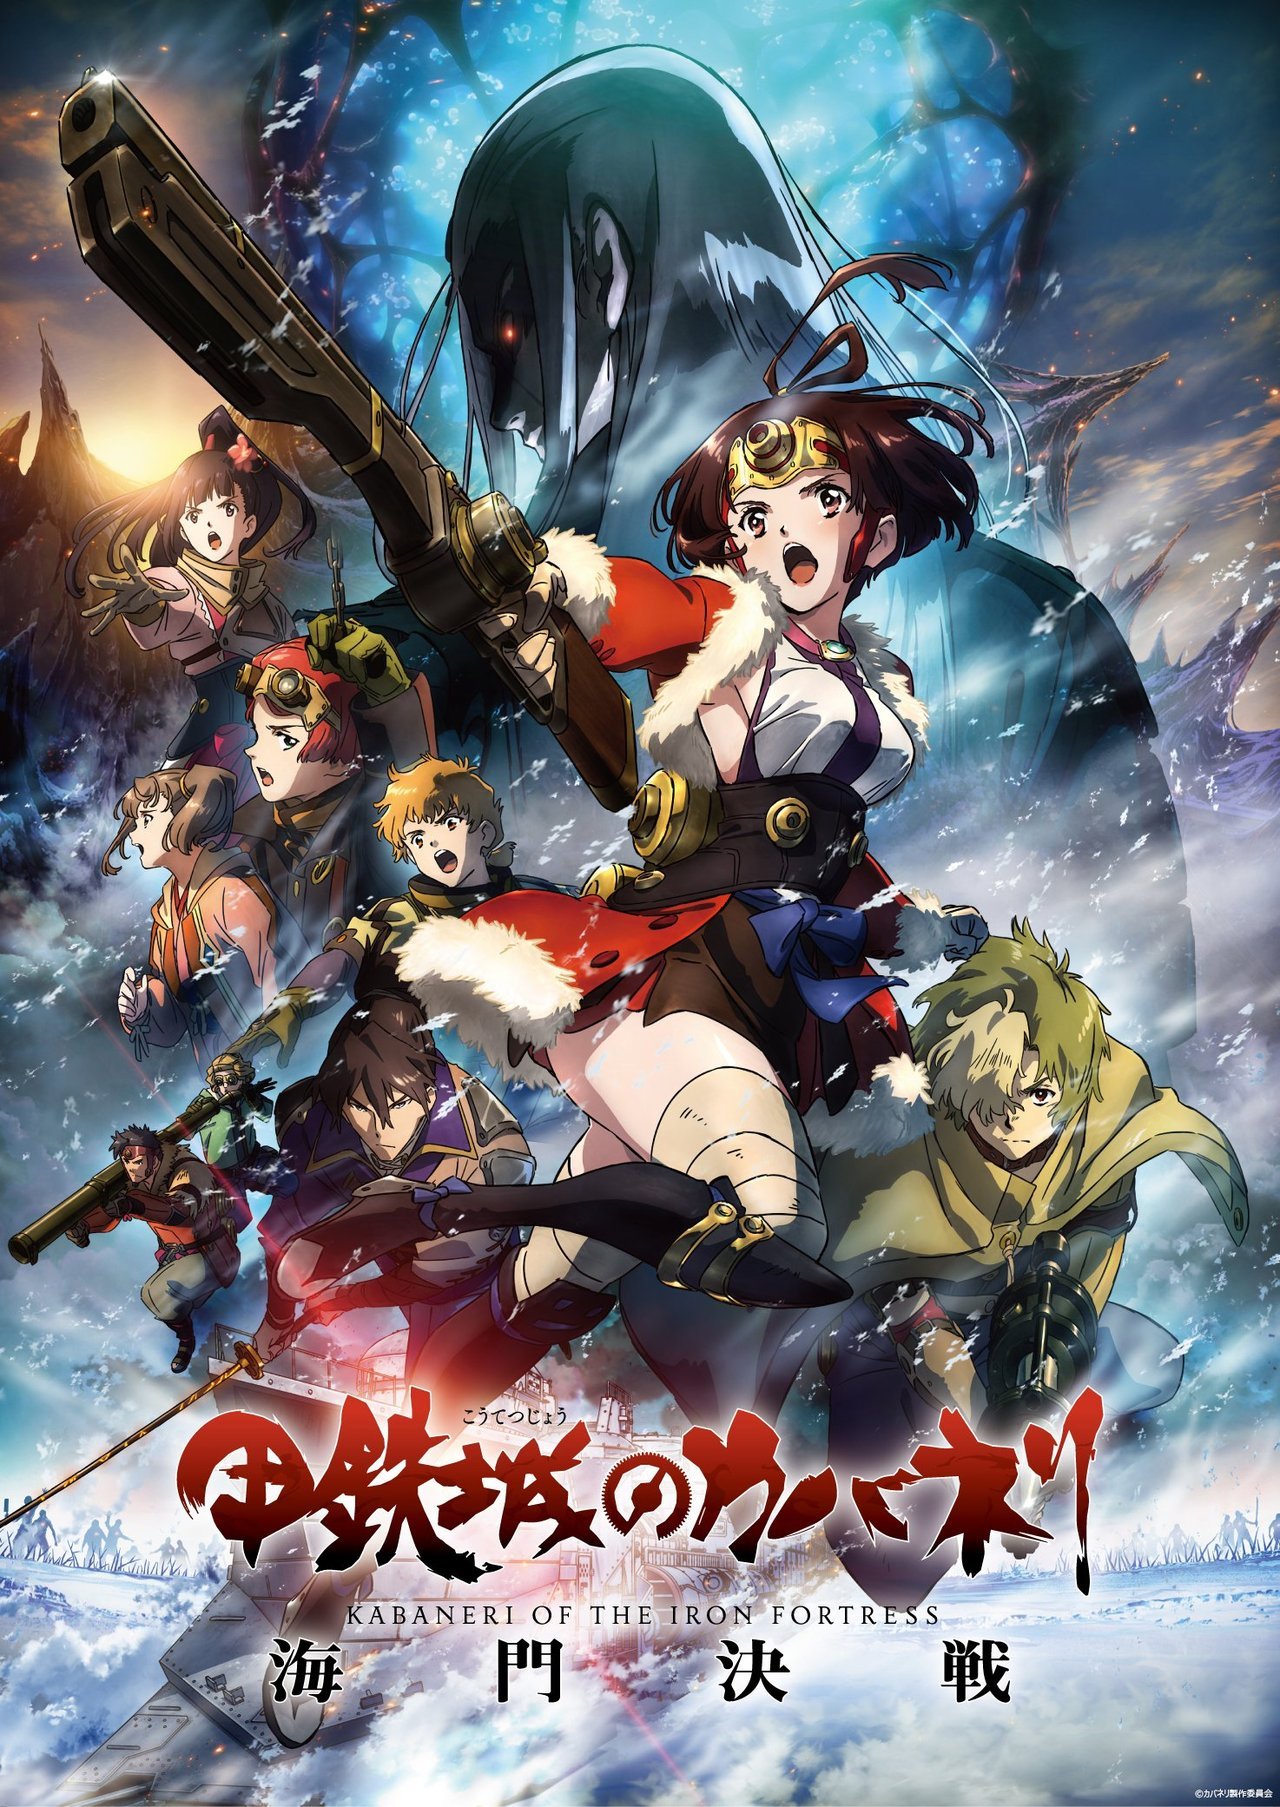 A new key visual for the âKabaneri of the Iron Fortress: The Battle of Unatoâ anime sequel film has been unveiled. EGOIST returns to perform the main music theme. The movie will open in Japanese theaters this Spring (WIT STUDIO)